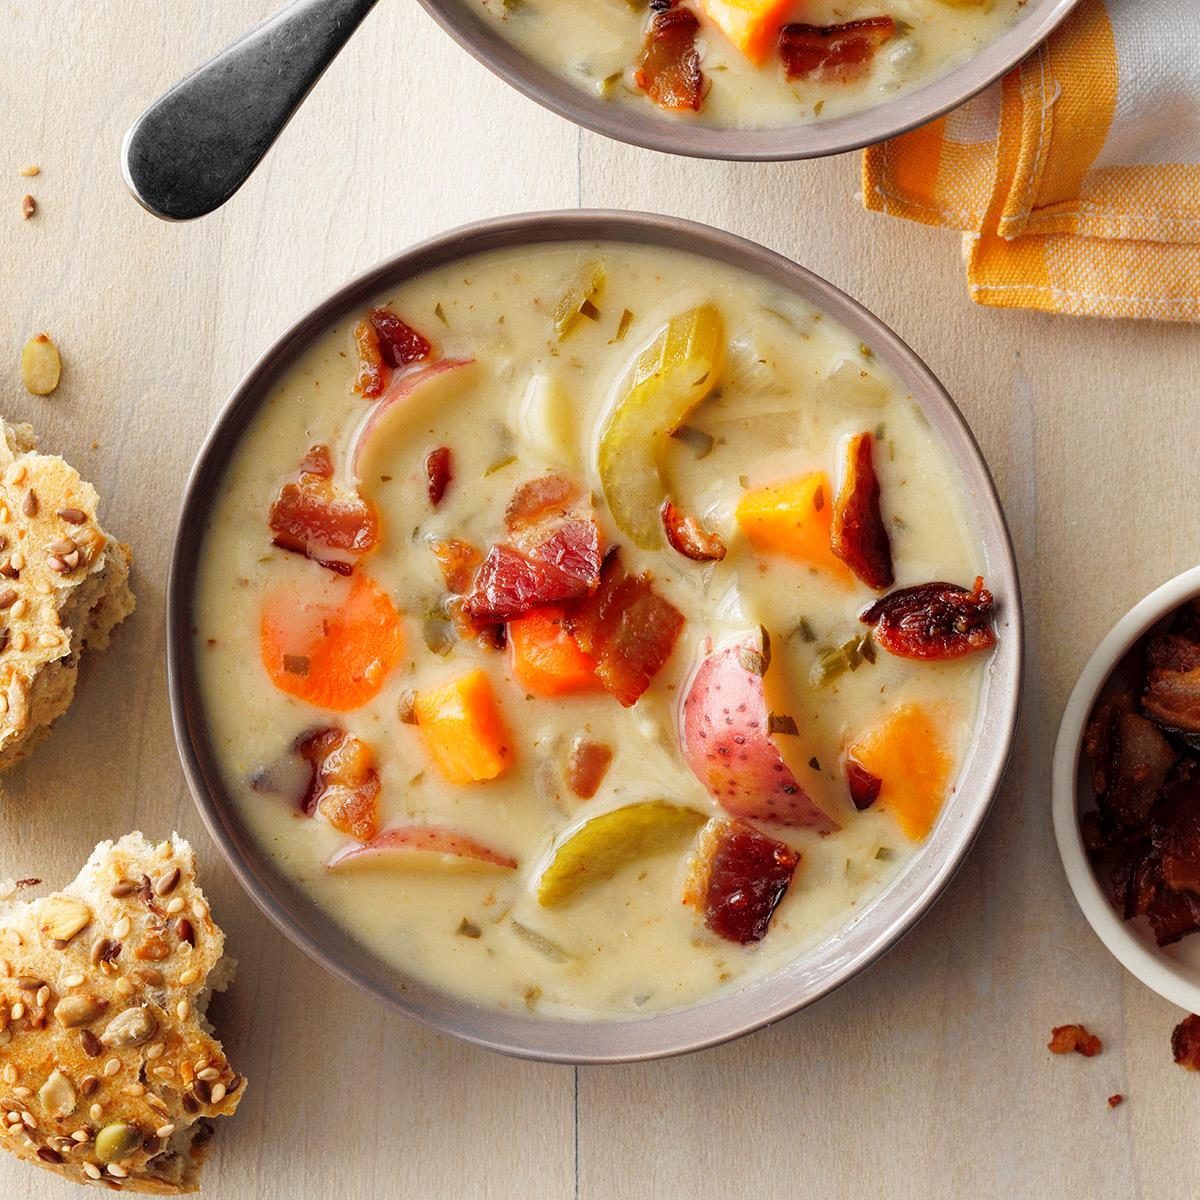 65 Chowder Recipes to Warm You Up I Taste of Home